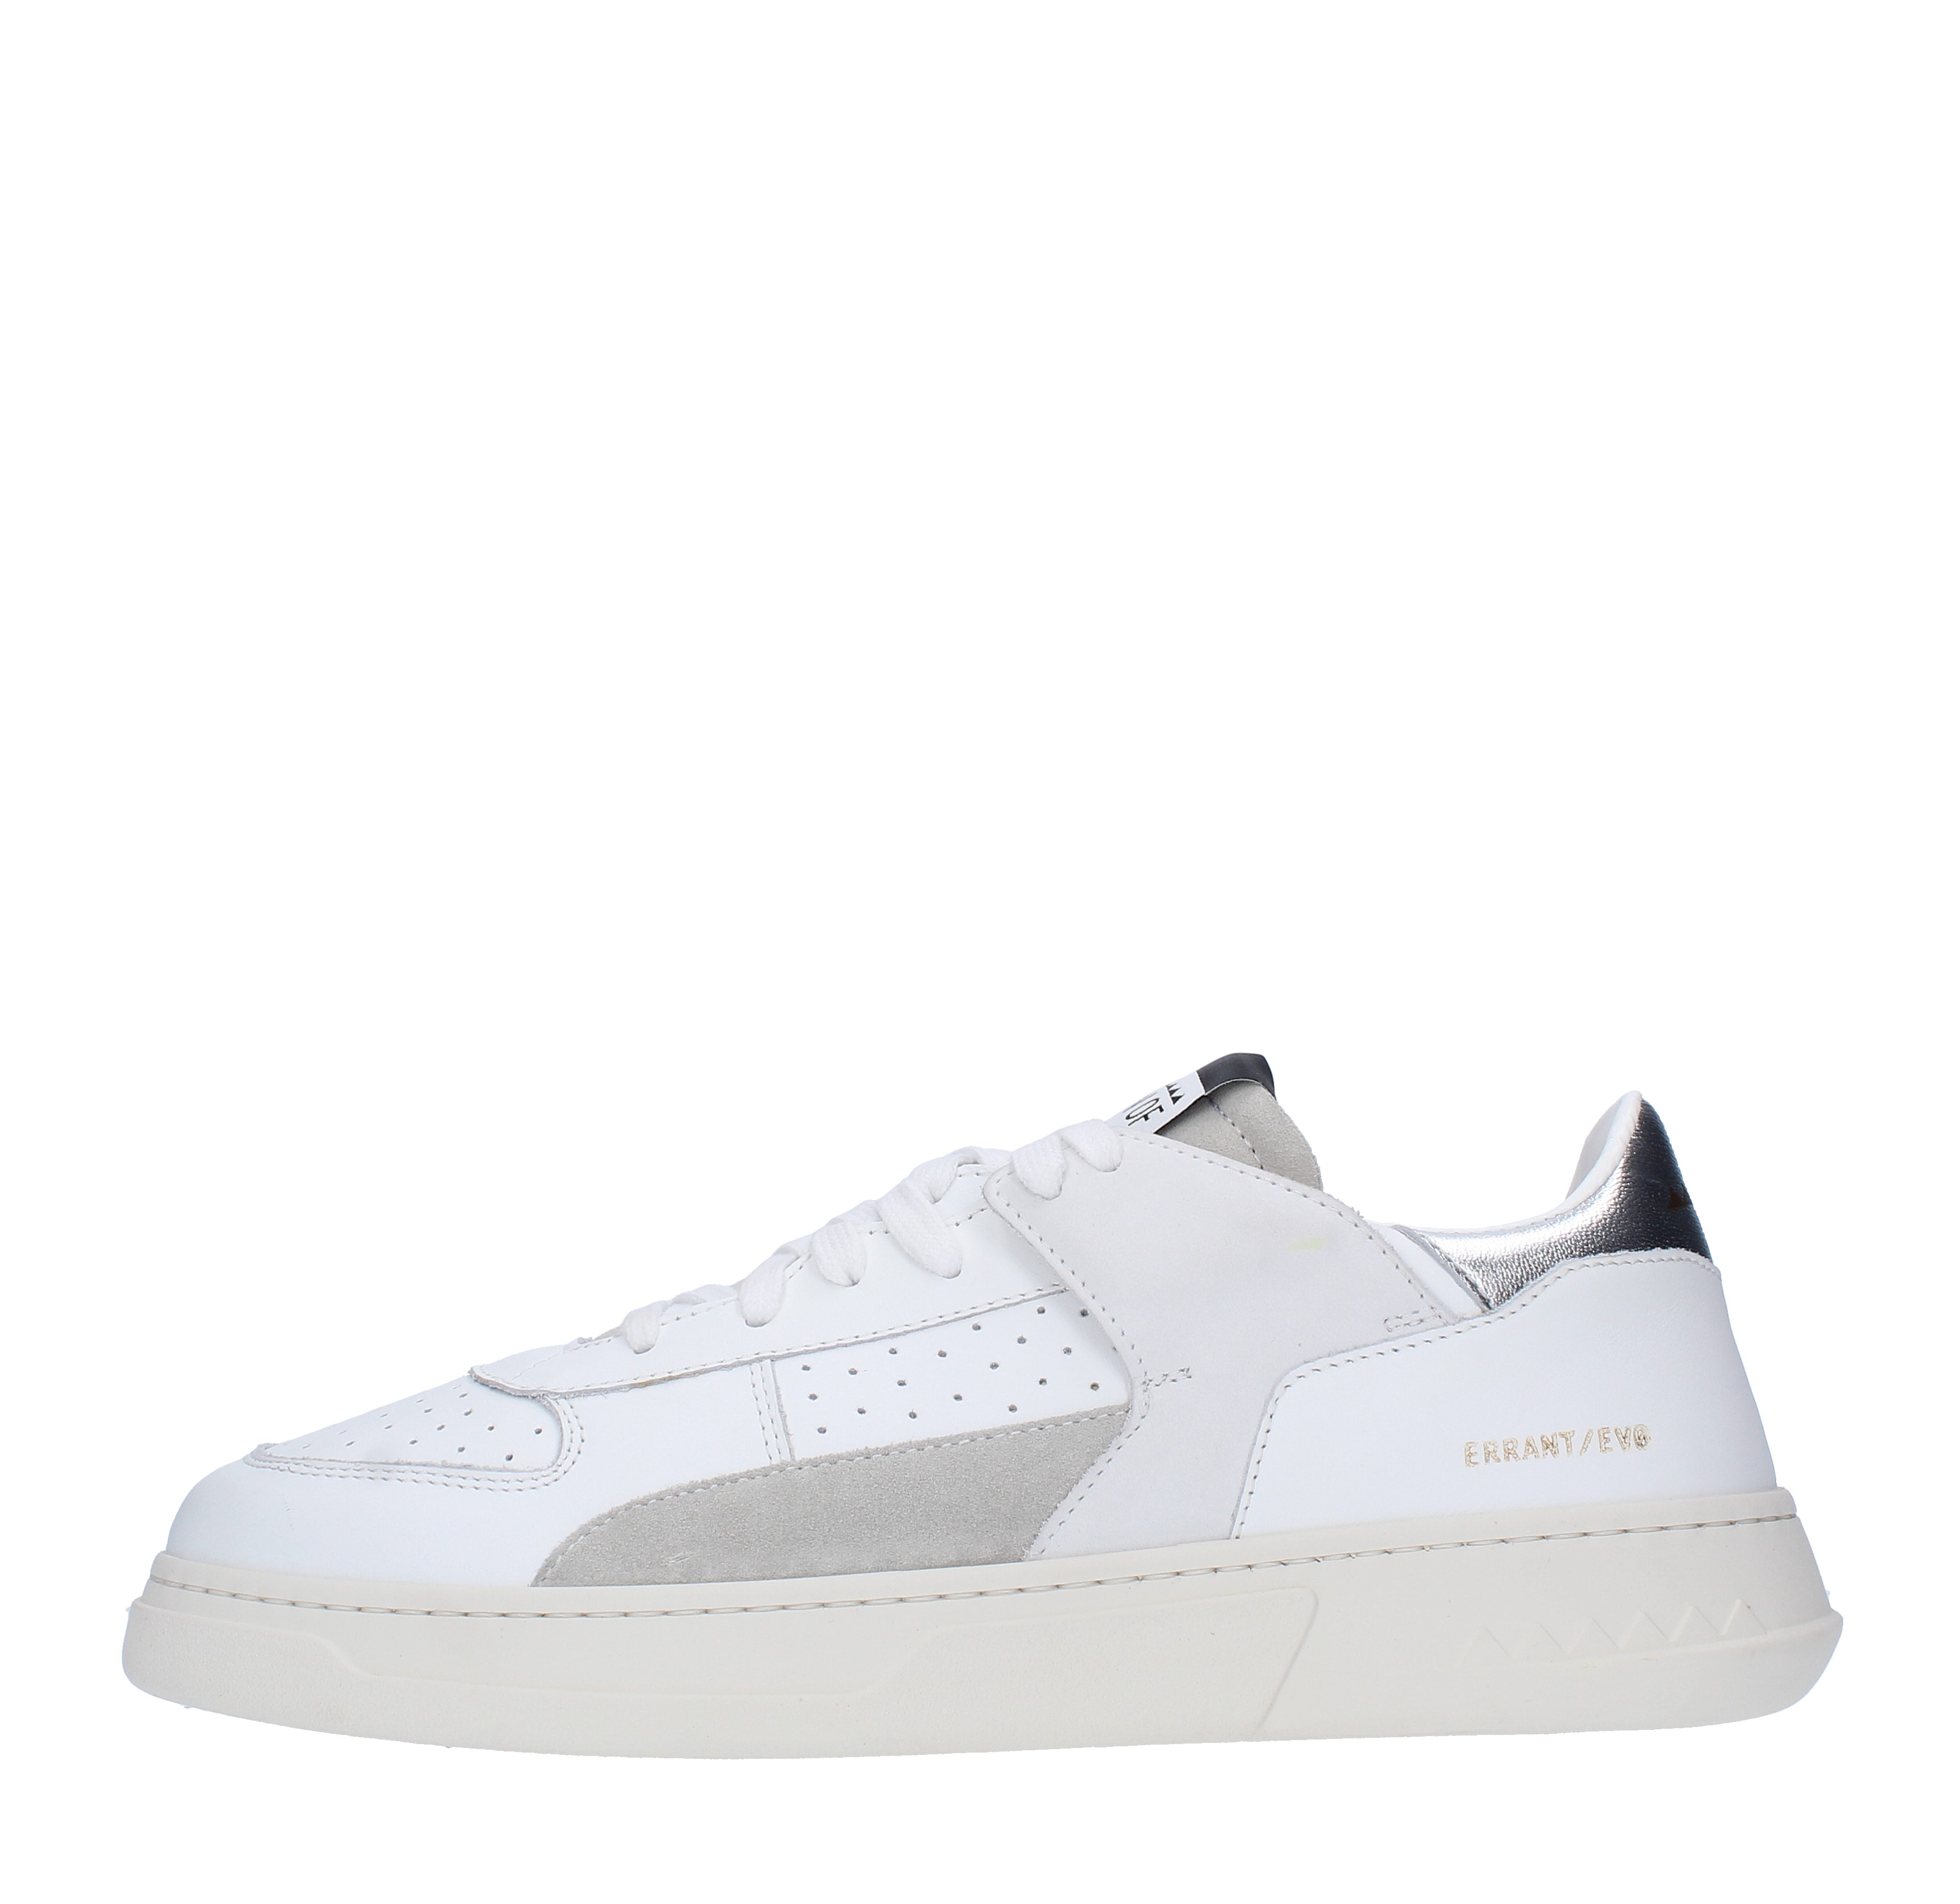 NOBODY RUN OF trainers in suede leather RUN OF | NOBODY SENZA STRAPPO MBIANCO-ARGENTO